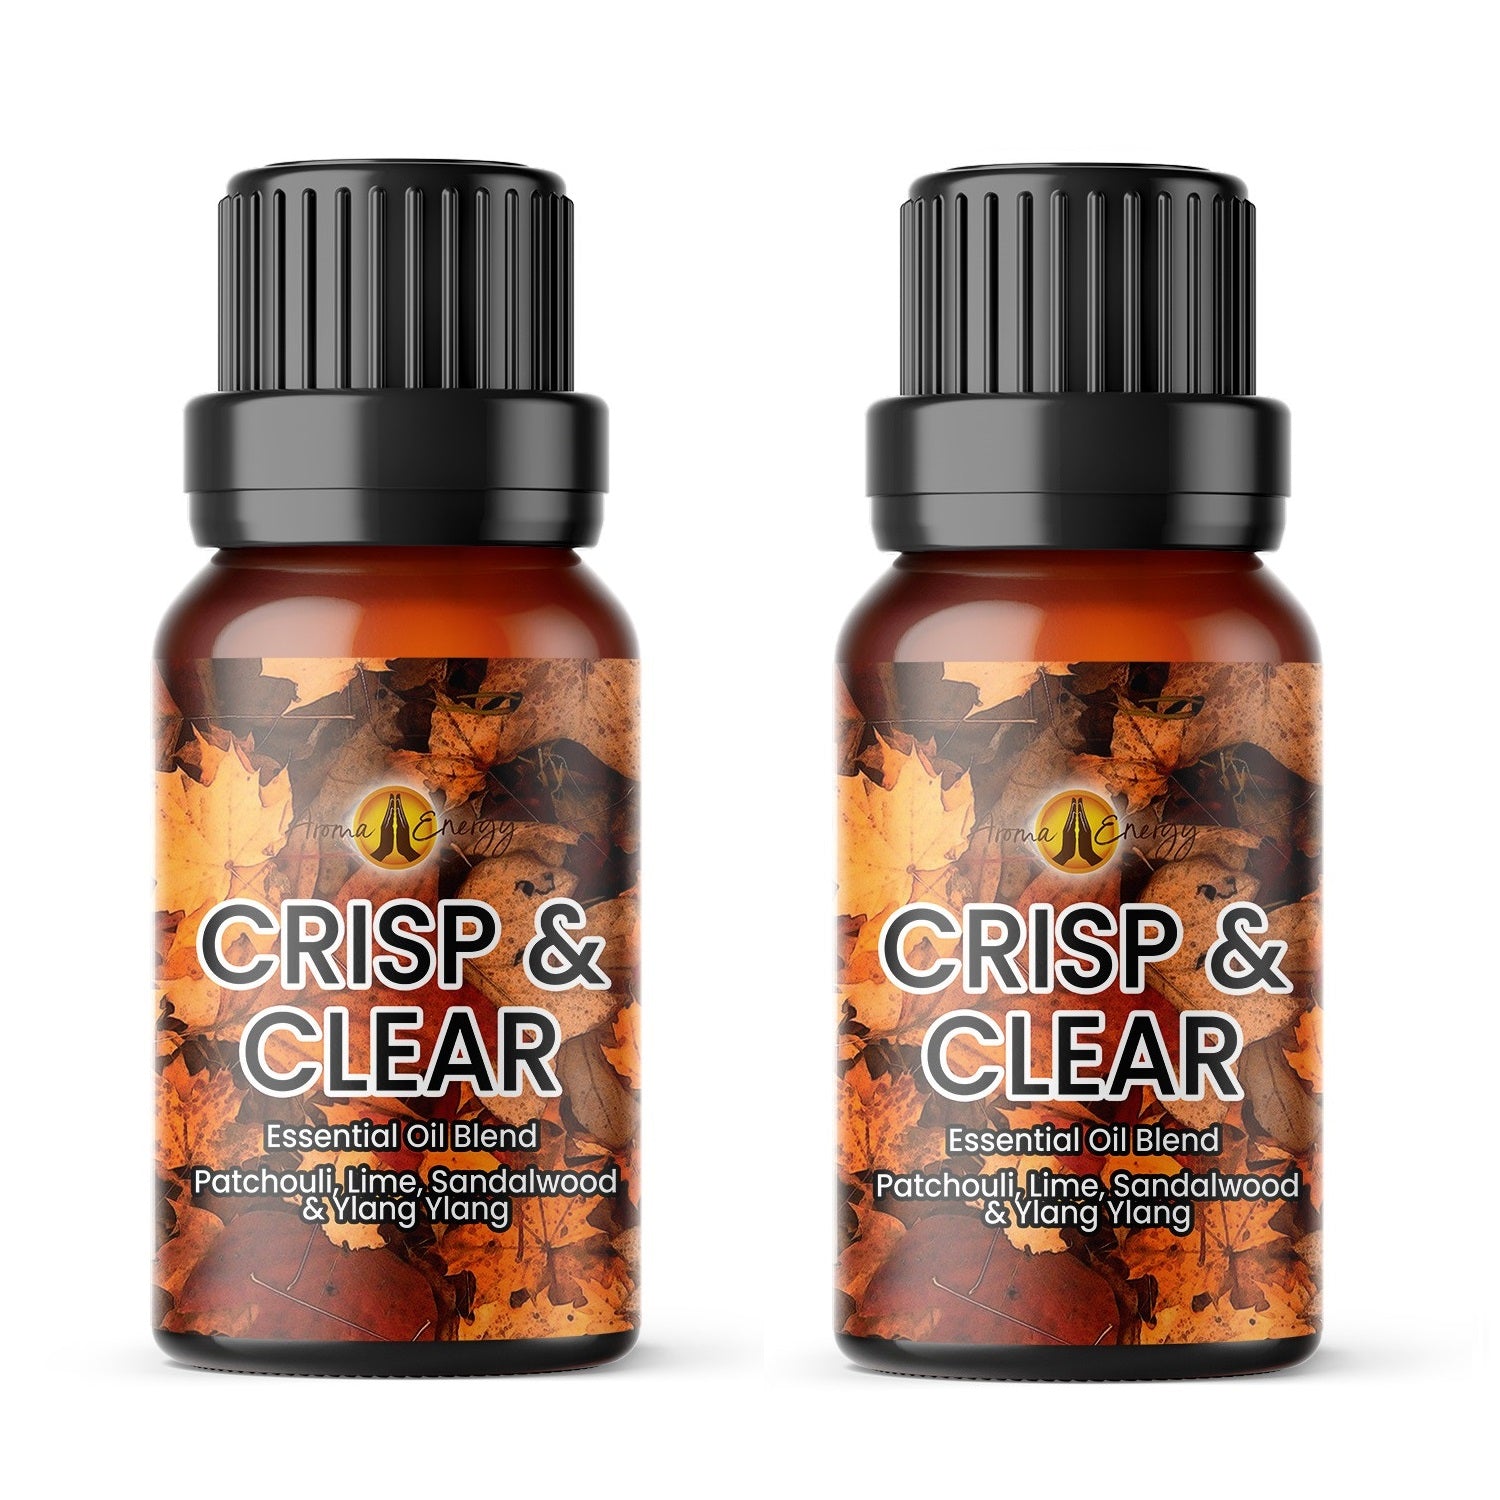 Crisp & Clear Pure Essential Oil Blend - Aroma Energy